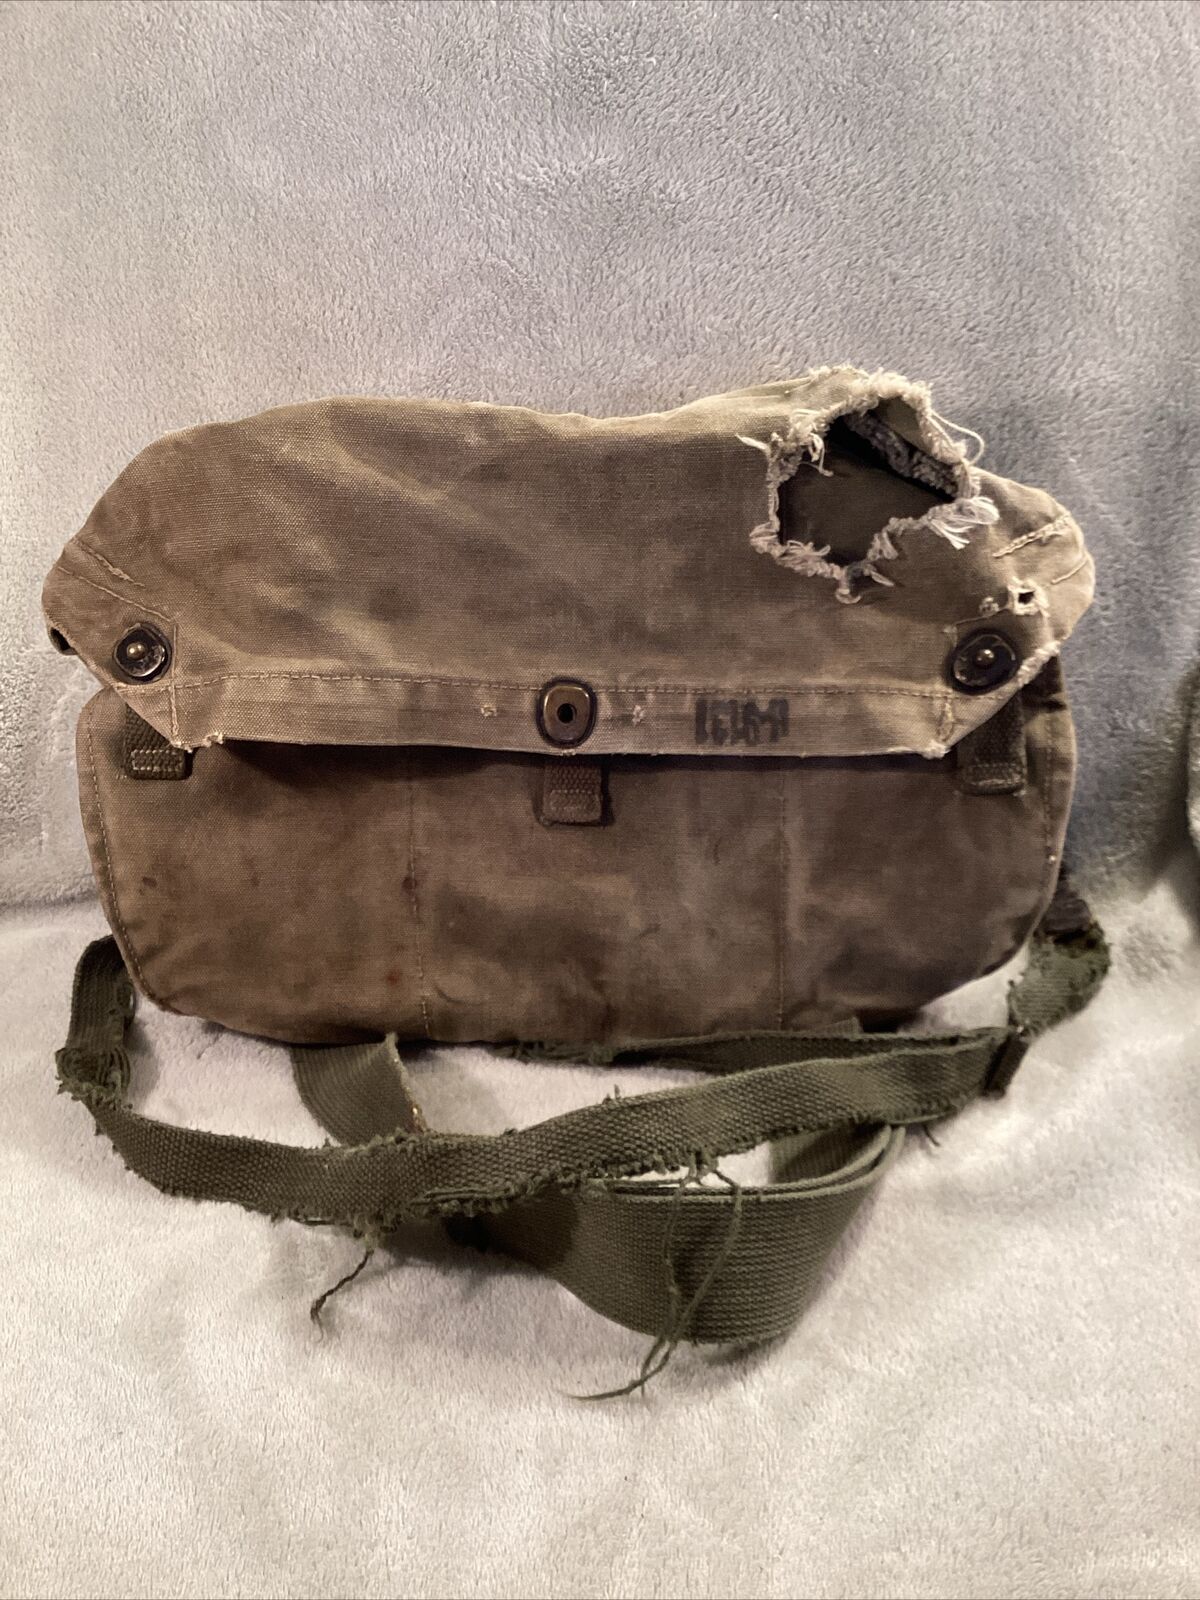 ORIGINAL WWII US ARMY M6 GAS MASK CARRY BAG Distressed Stamped